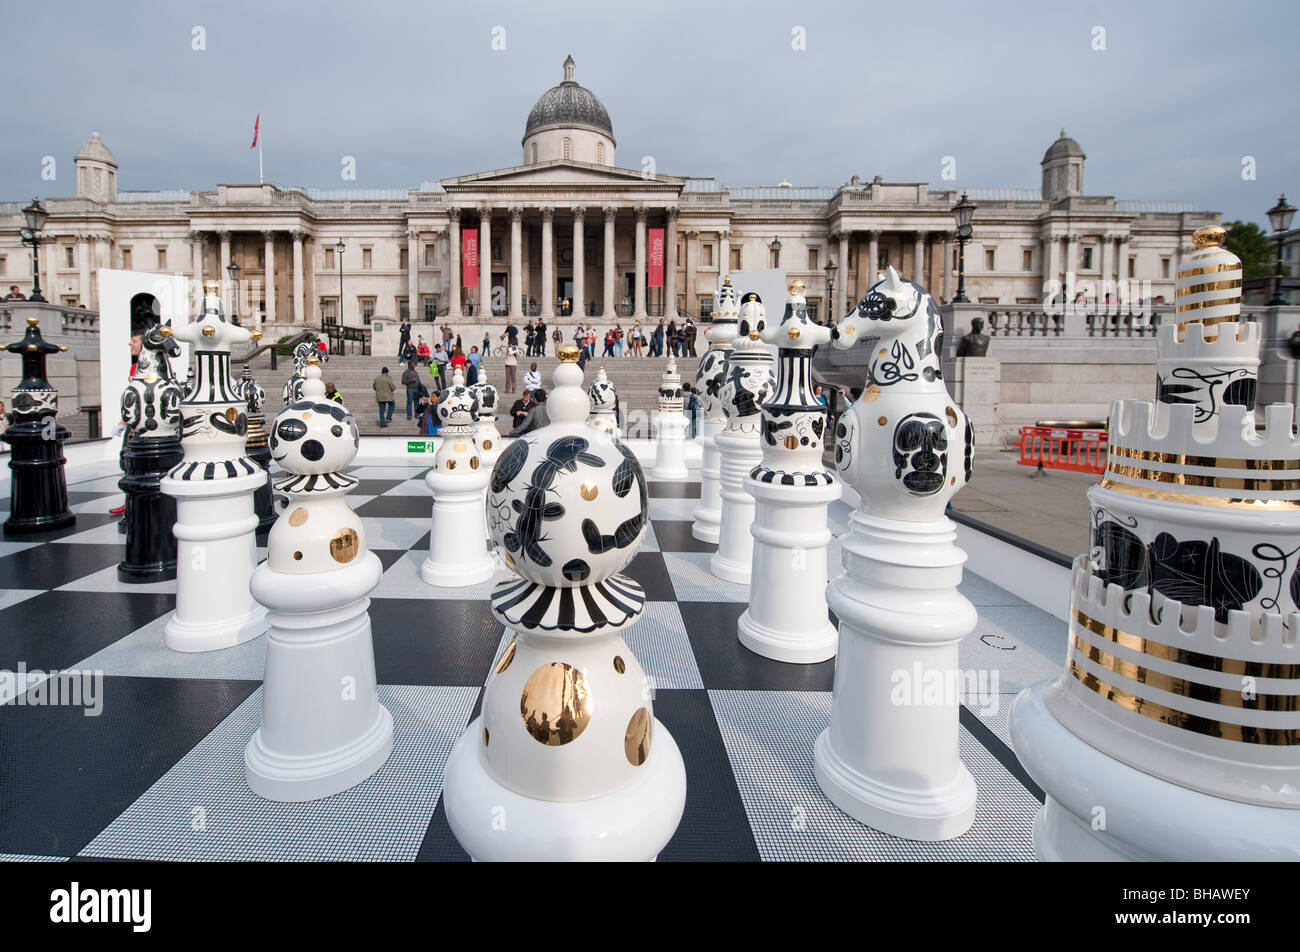 Giant ceramic chess pieces on a glass mosaic chess board  by Spanish designer Jaime Hayon in Trafalgar Square, London Stock Photo